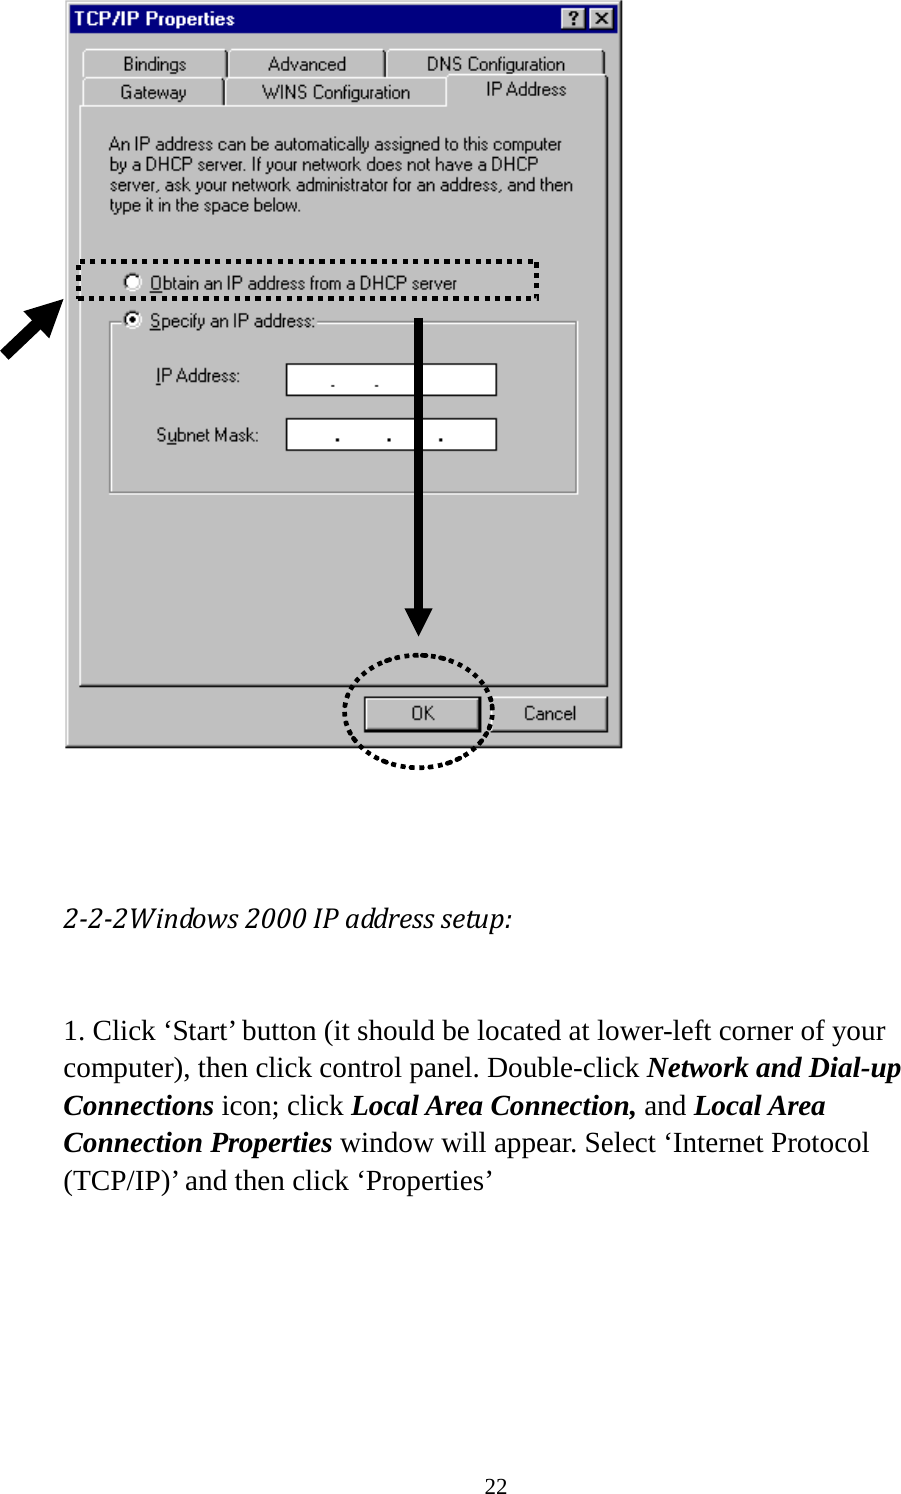 22     2-2-2Windows 2000 IP address setup:  1. Click ‘Start’ button (it should be located at lower-left corner of your computer), then click control panel. Double-click Network and Dial-up Connections icon; click Local Area Connection, and Local Area Connection Properties window will appear. Select ‘Internet Protocol (TCP/IP)’ and then click ‘Properties’    